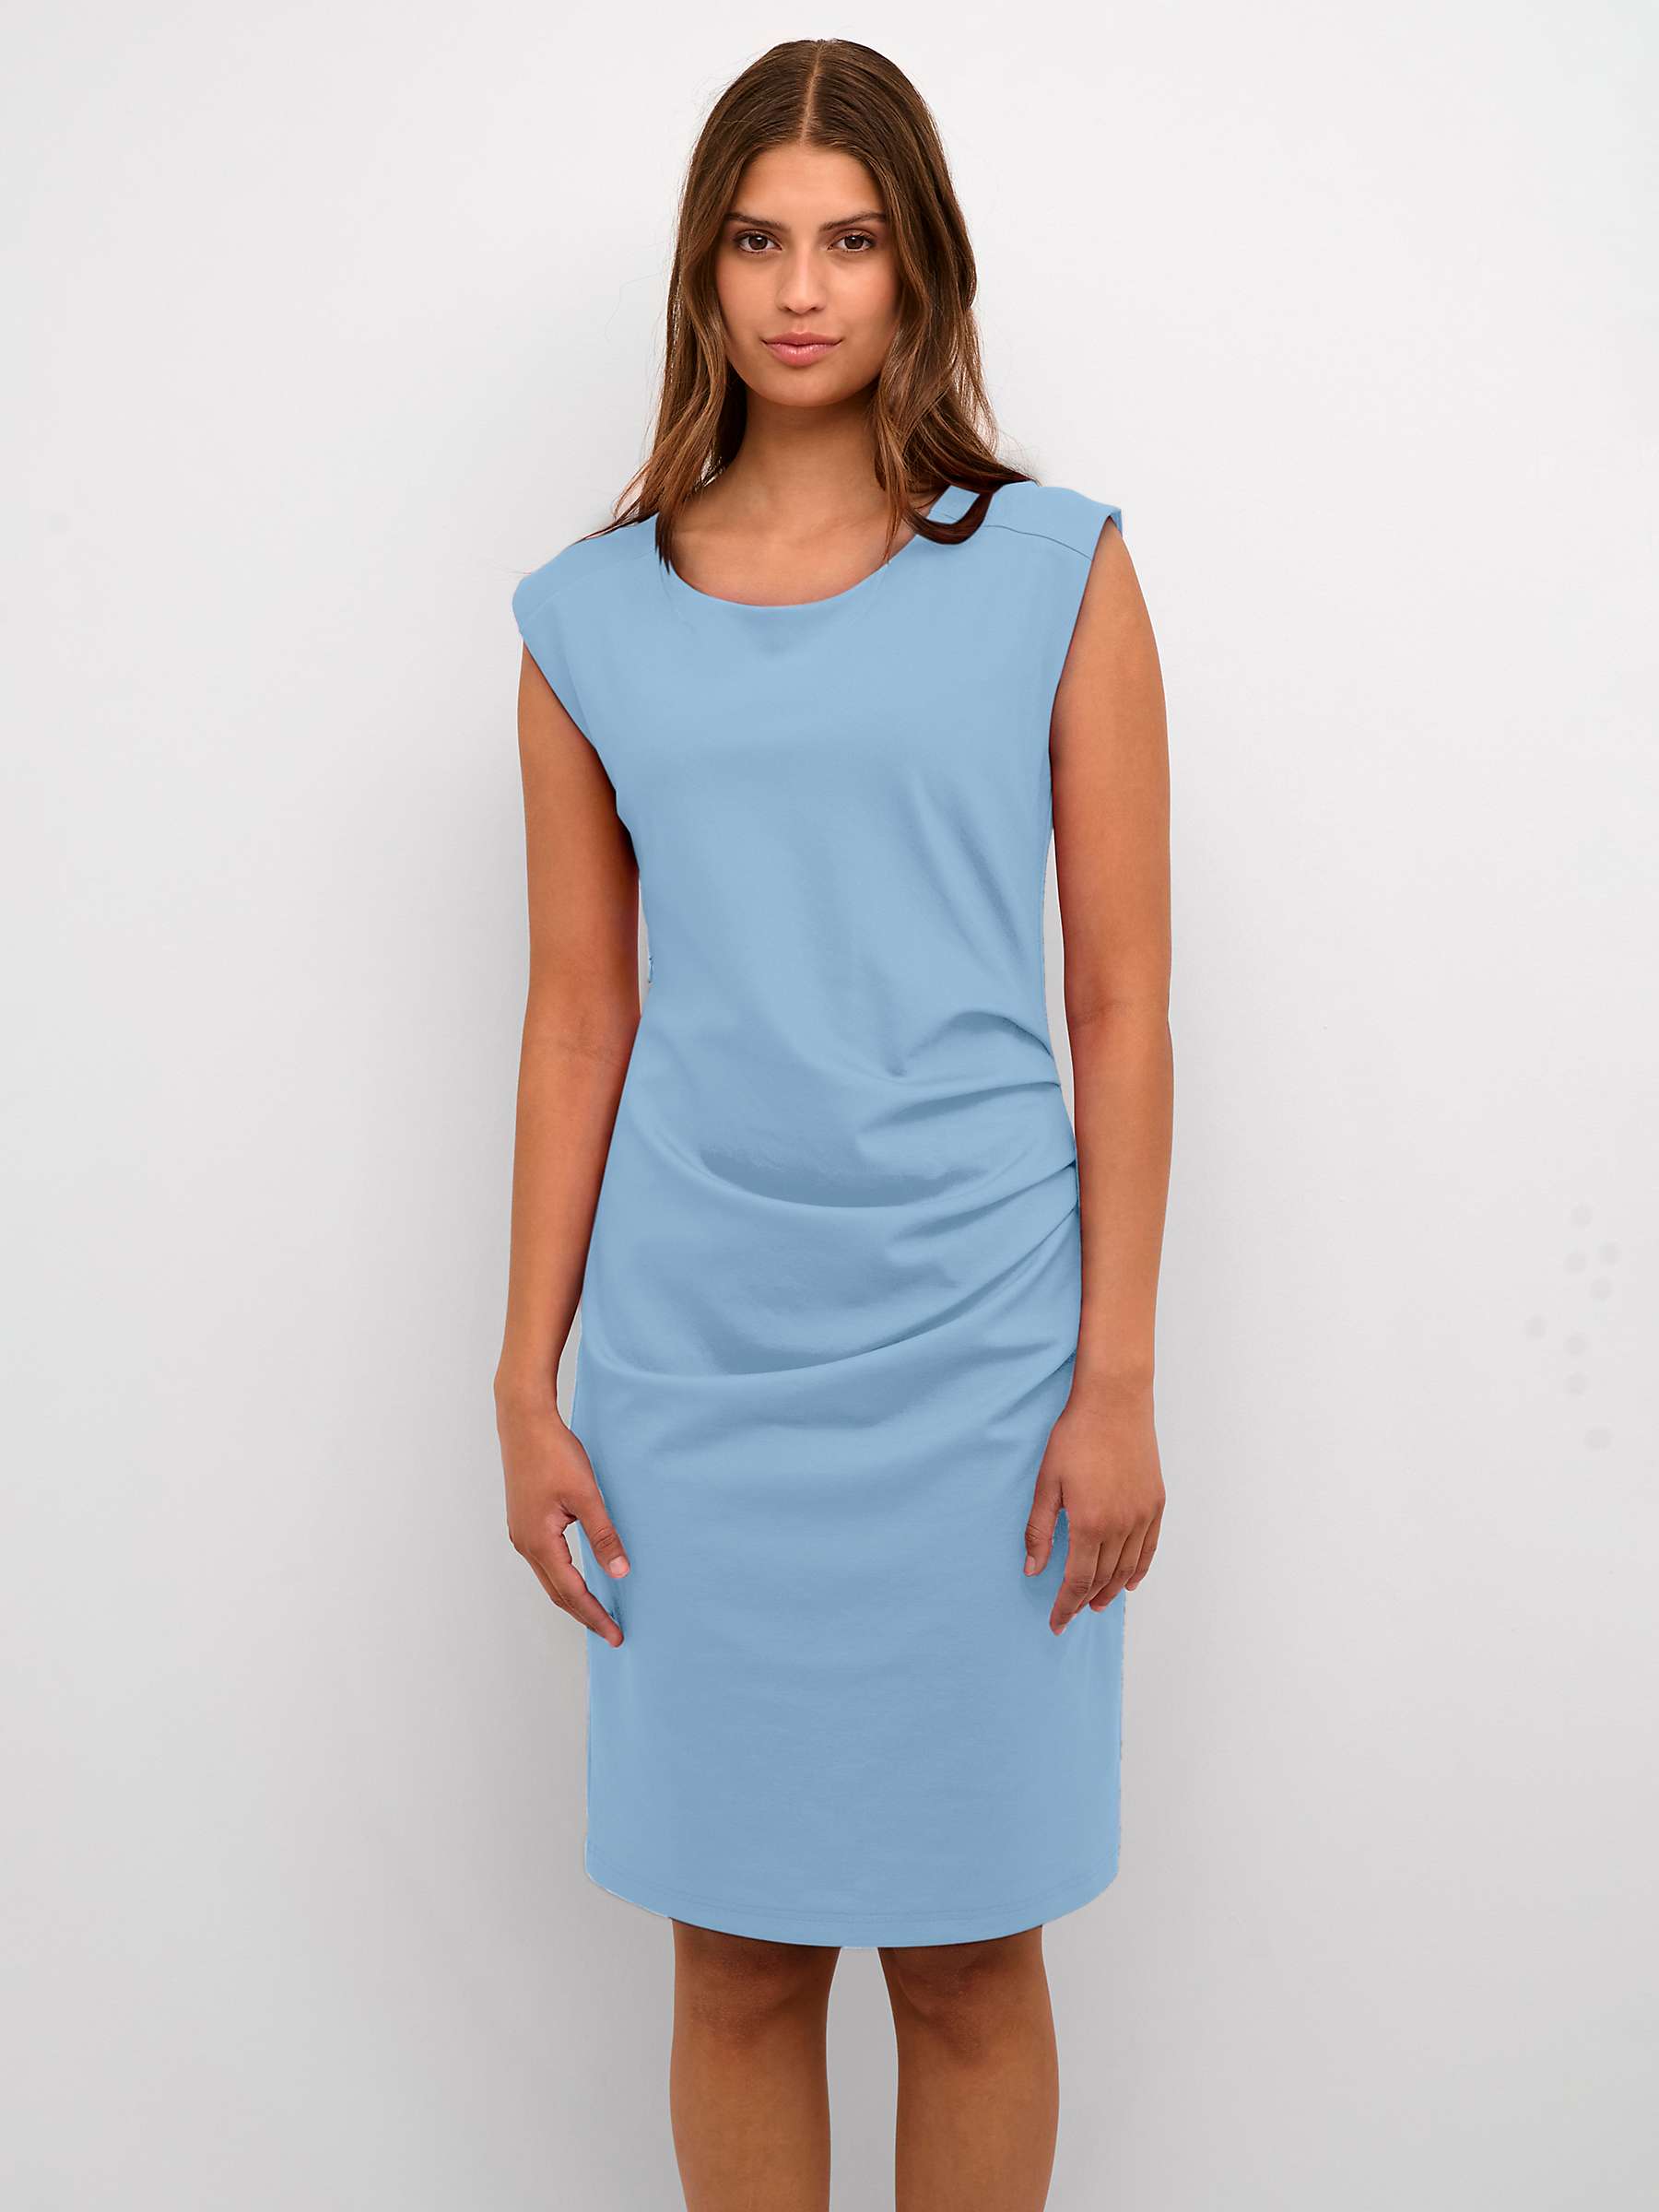 Buy KAFFE India Sleeveless Fitted Cocktail Dress, Faded Denim Online at johnlewis.com